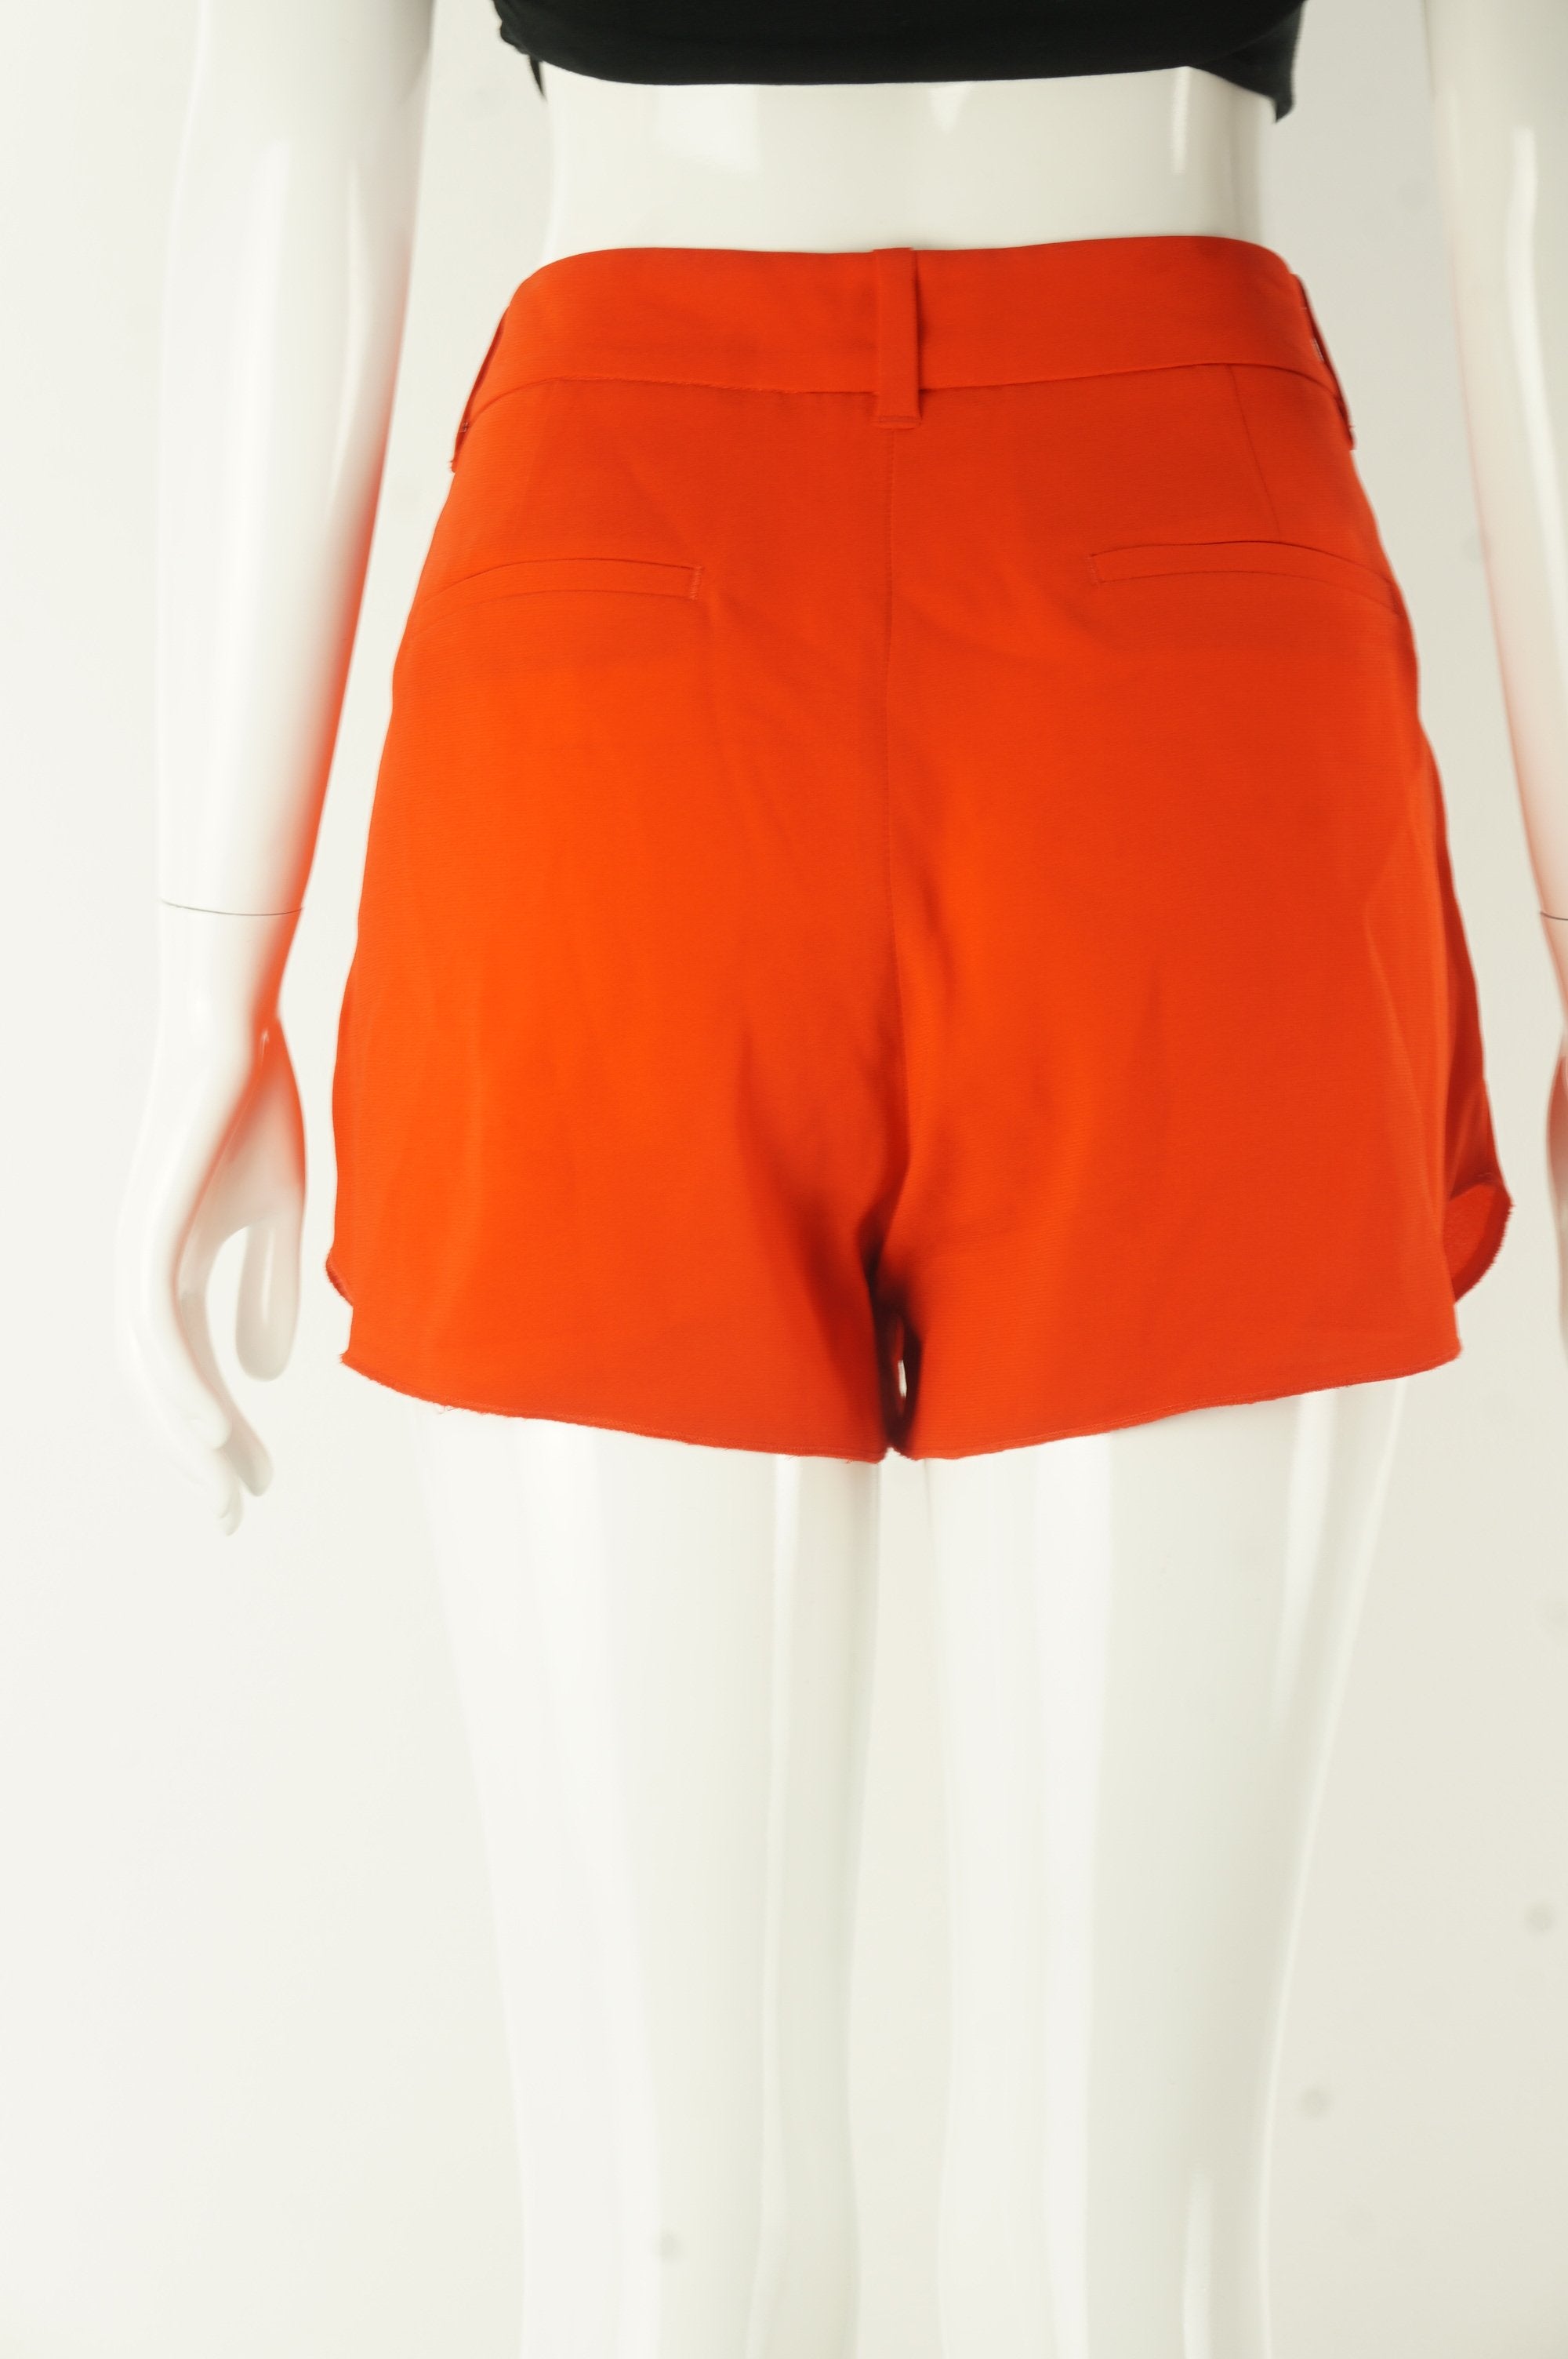 Babaton High Waisted Red Shorts, The cute bright red color that goes with your brillant personability. Pleats in the front. Pair with your simple bodysuit and you are set for the perfect summer weekend day!, Red, 77% Tracetate, 23% Polyester, women's Pants & Shorts, women's Red Pants & Shorts, Babaton women's Pants & Shorts, Aritzia high wasted shorts, Cute red women's shorts